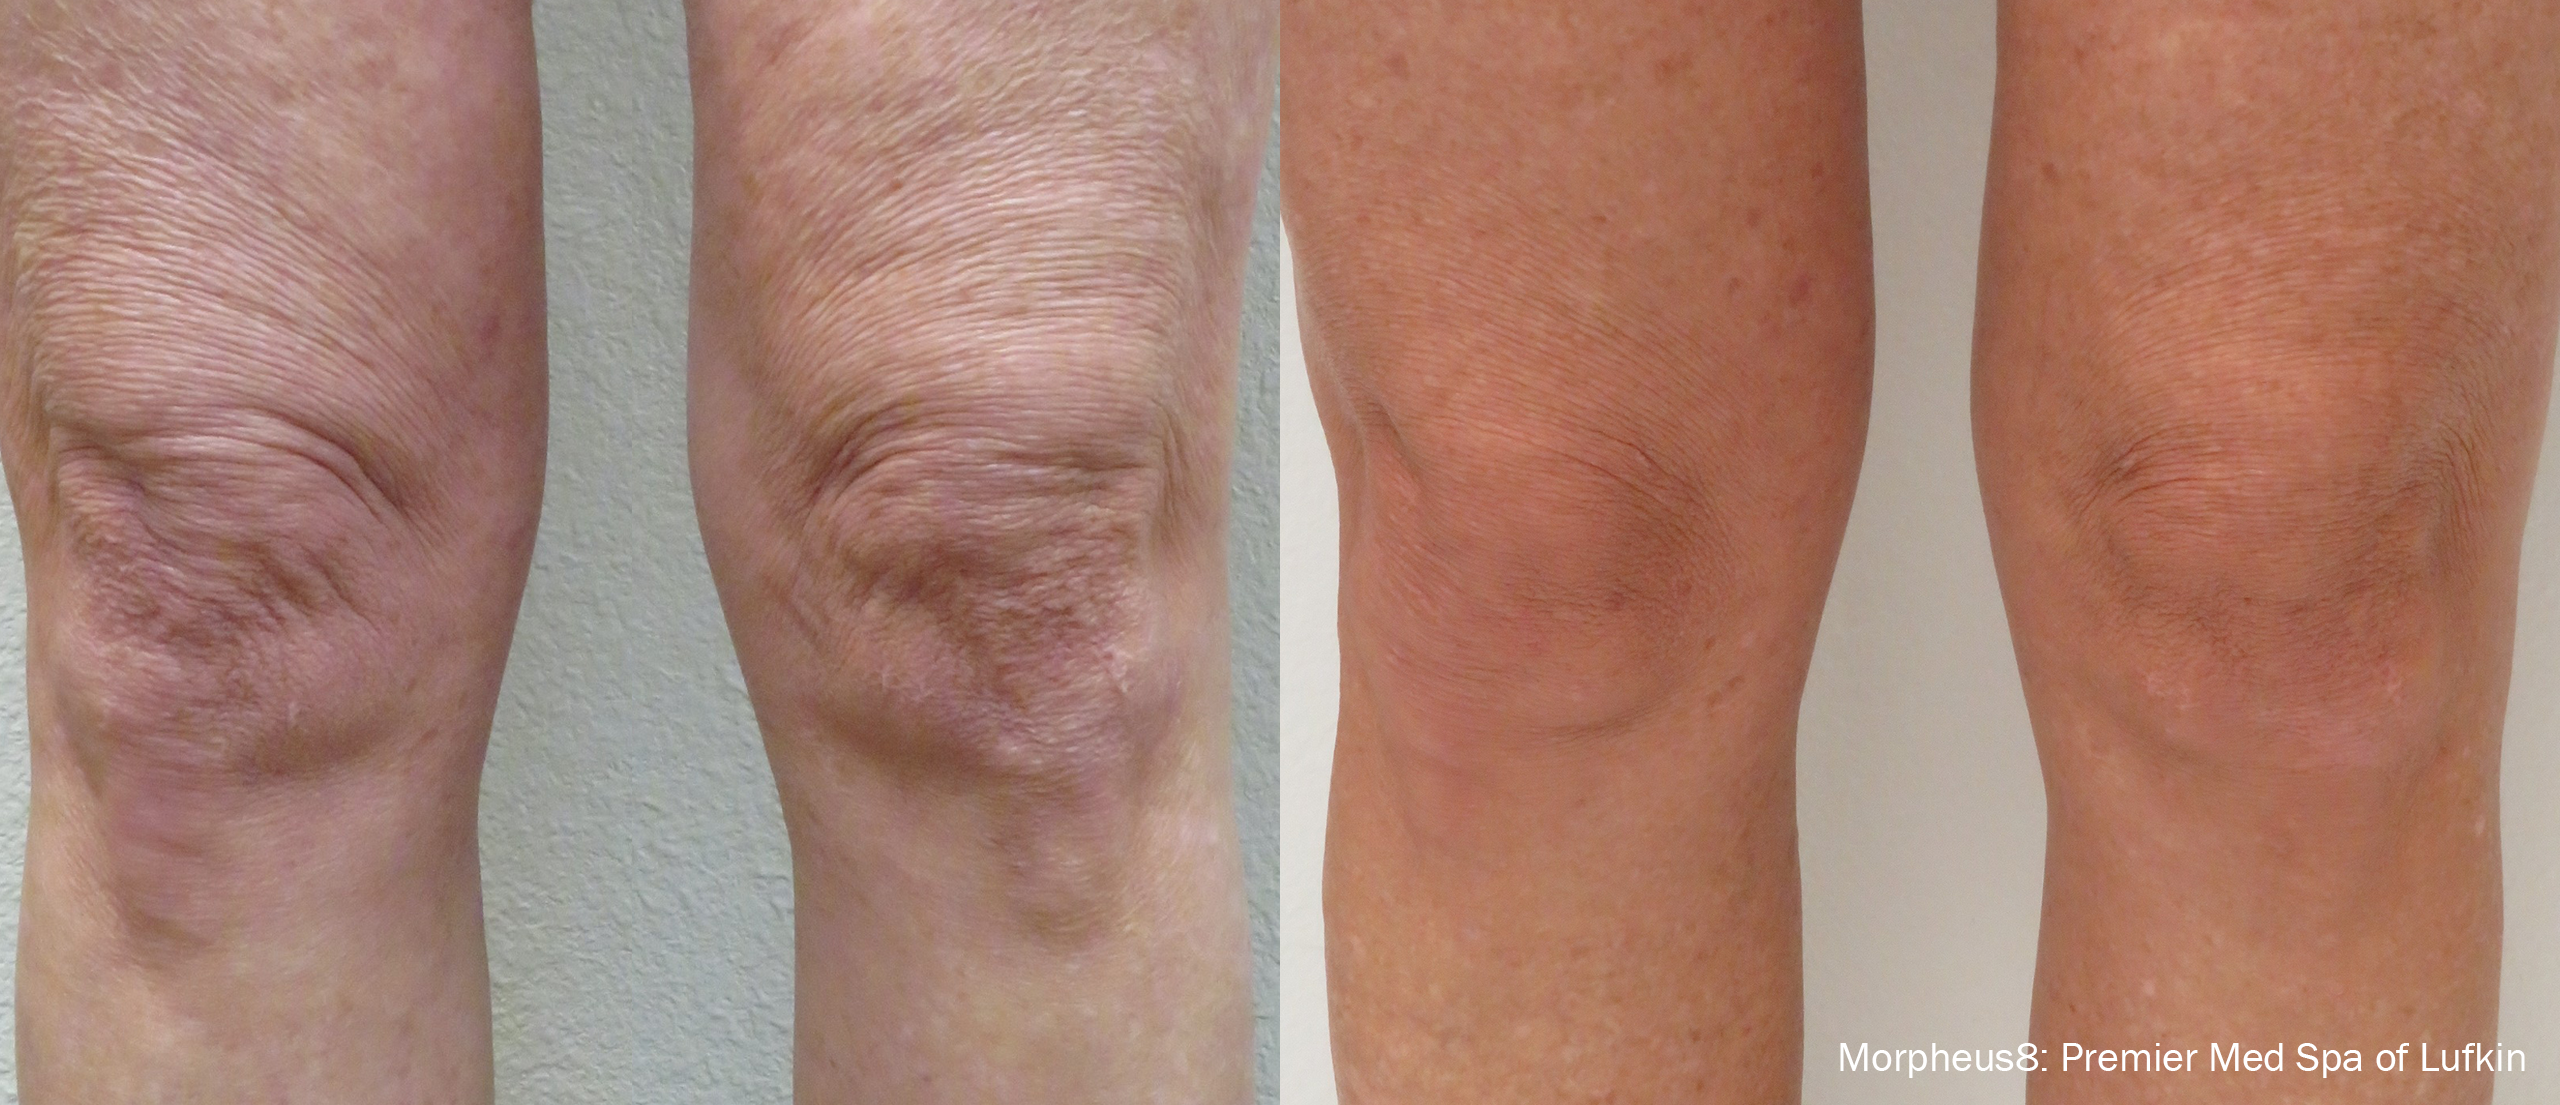 Morpheus8 Before and After Legs